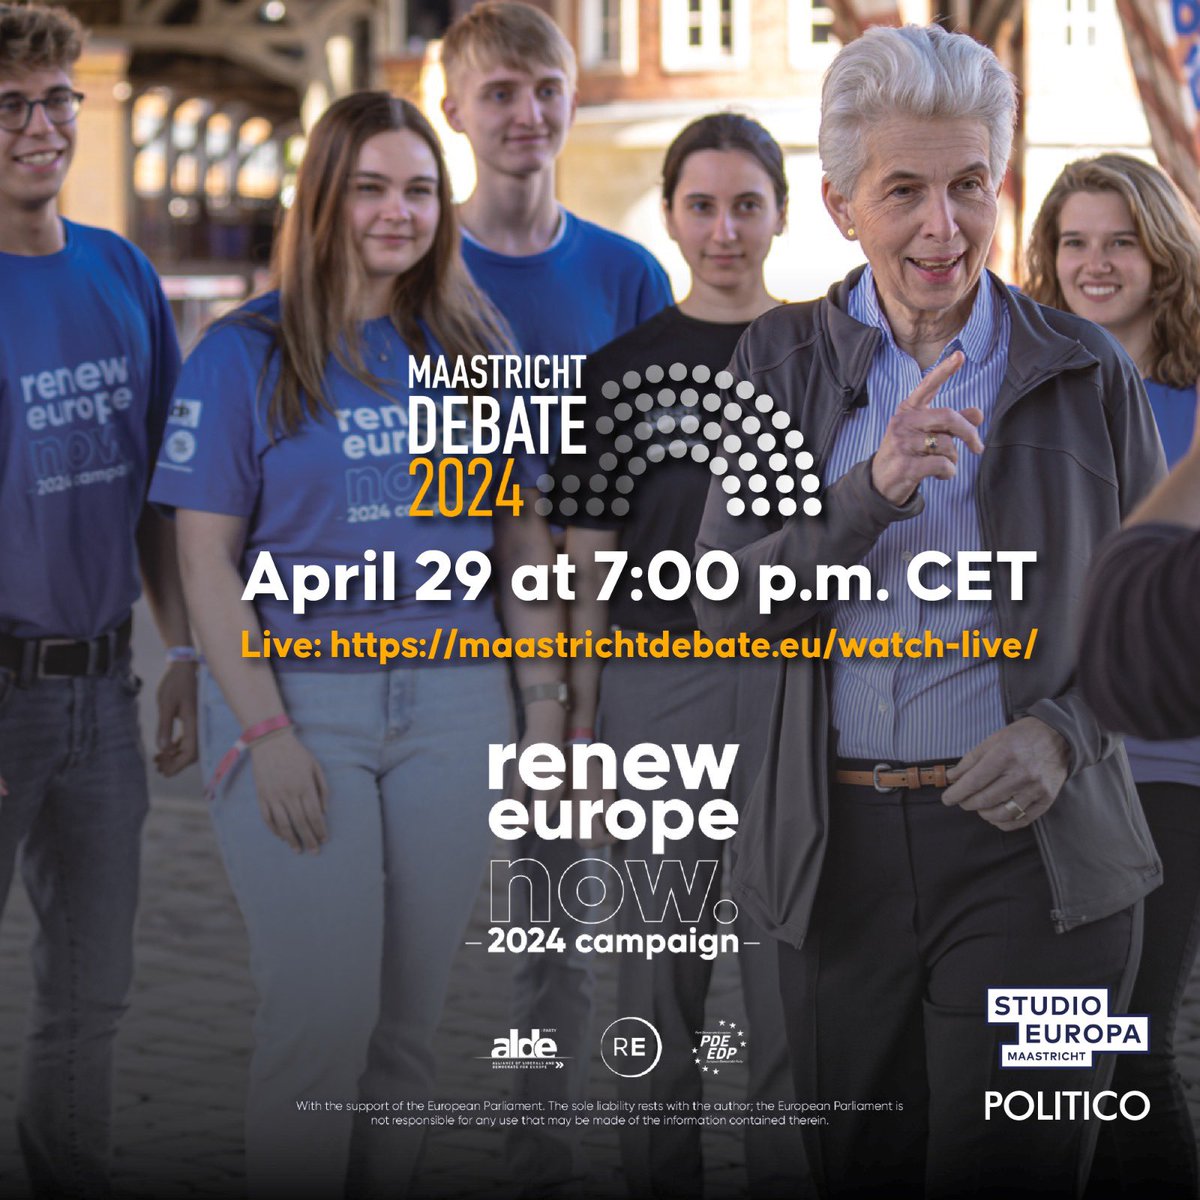 The 2024 Maastricht Debate is a key political event for European voters this spring 🗳️🇪🇺 Eight candidates vying for the leadership of Europe will take the stage to answer your questions and help you make an informed decision when you cast your vote. For our group, @RenewEurope…